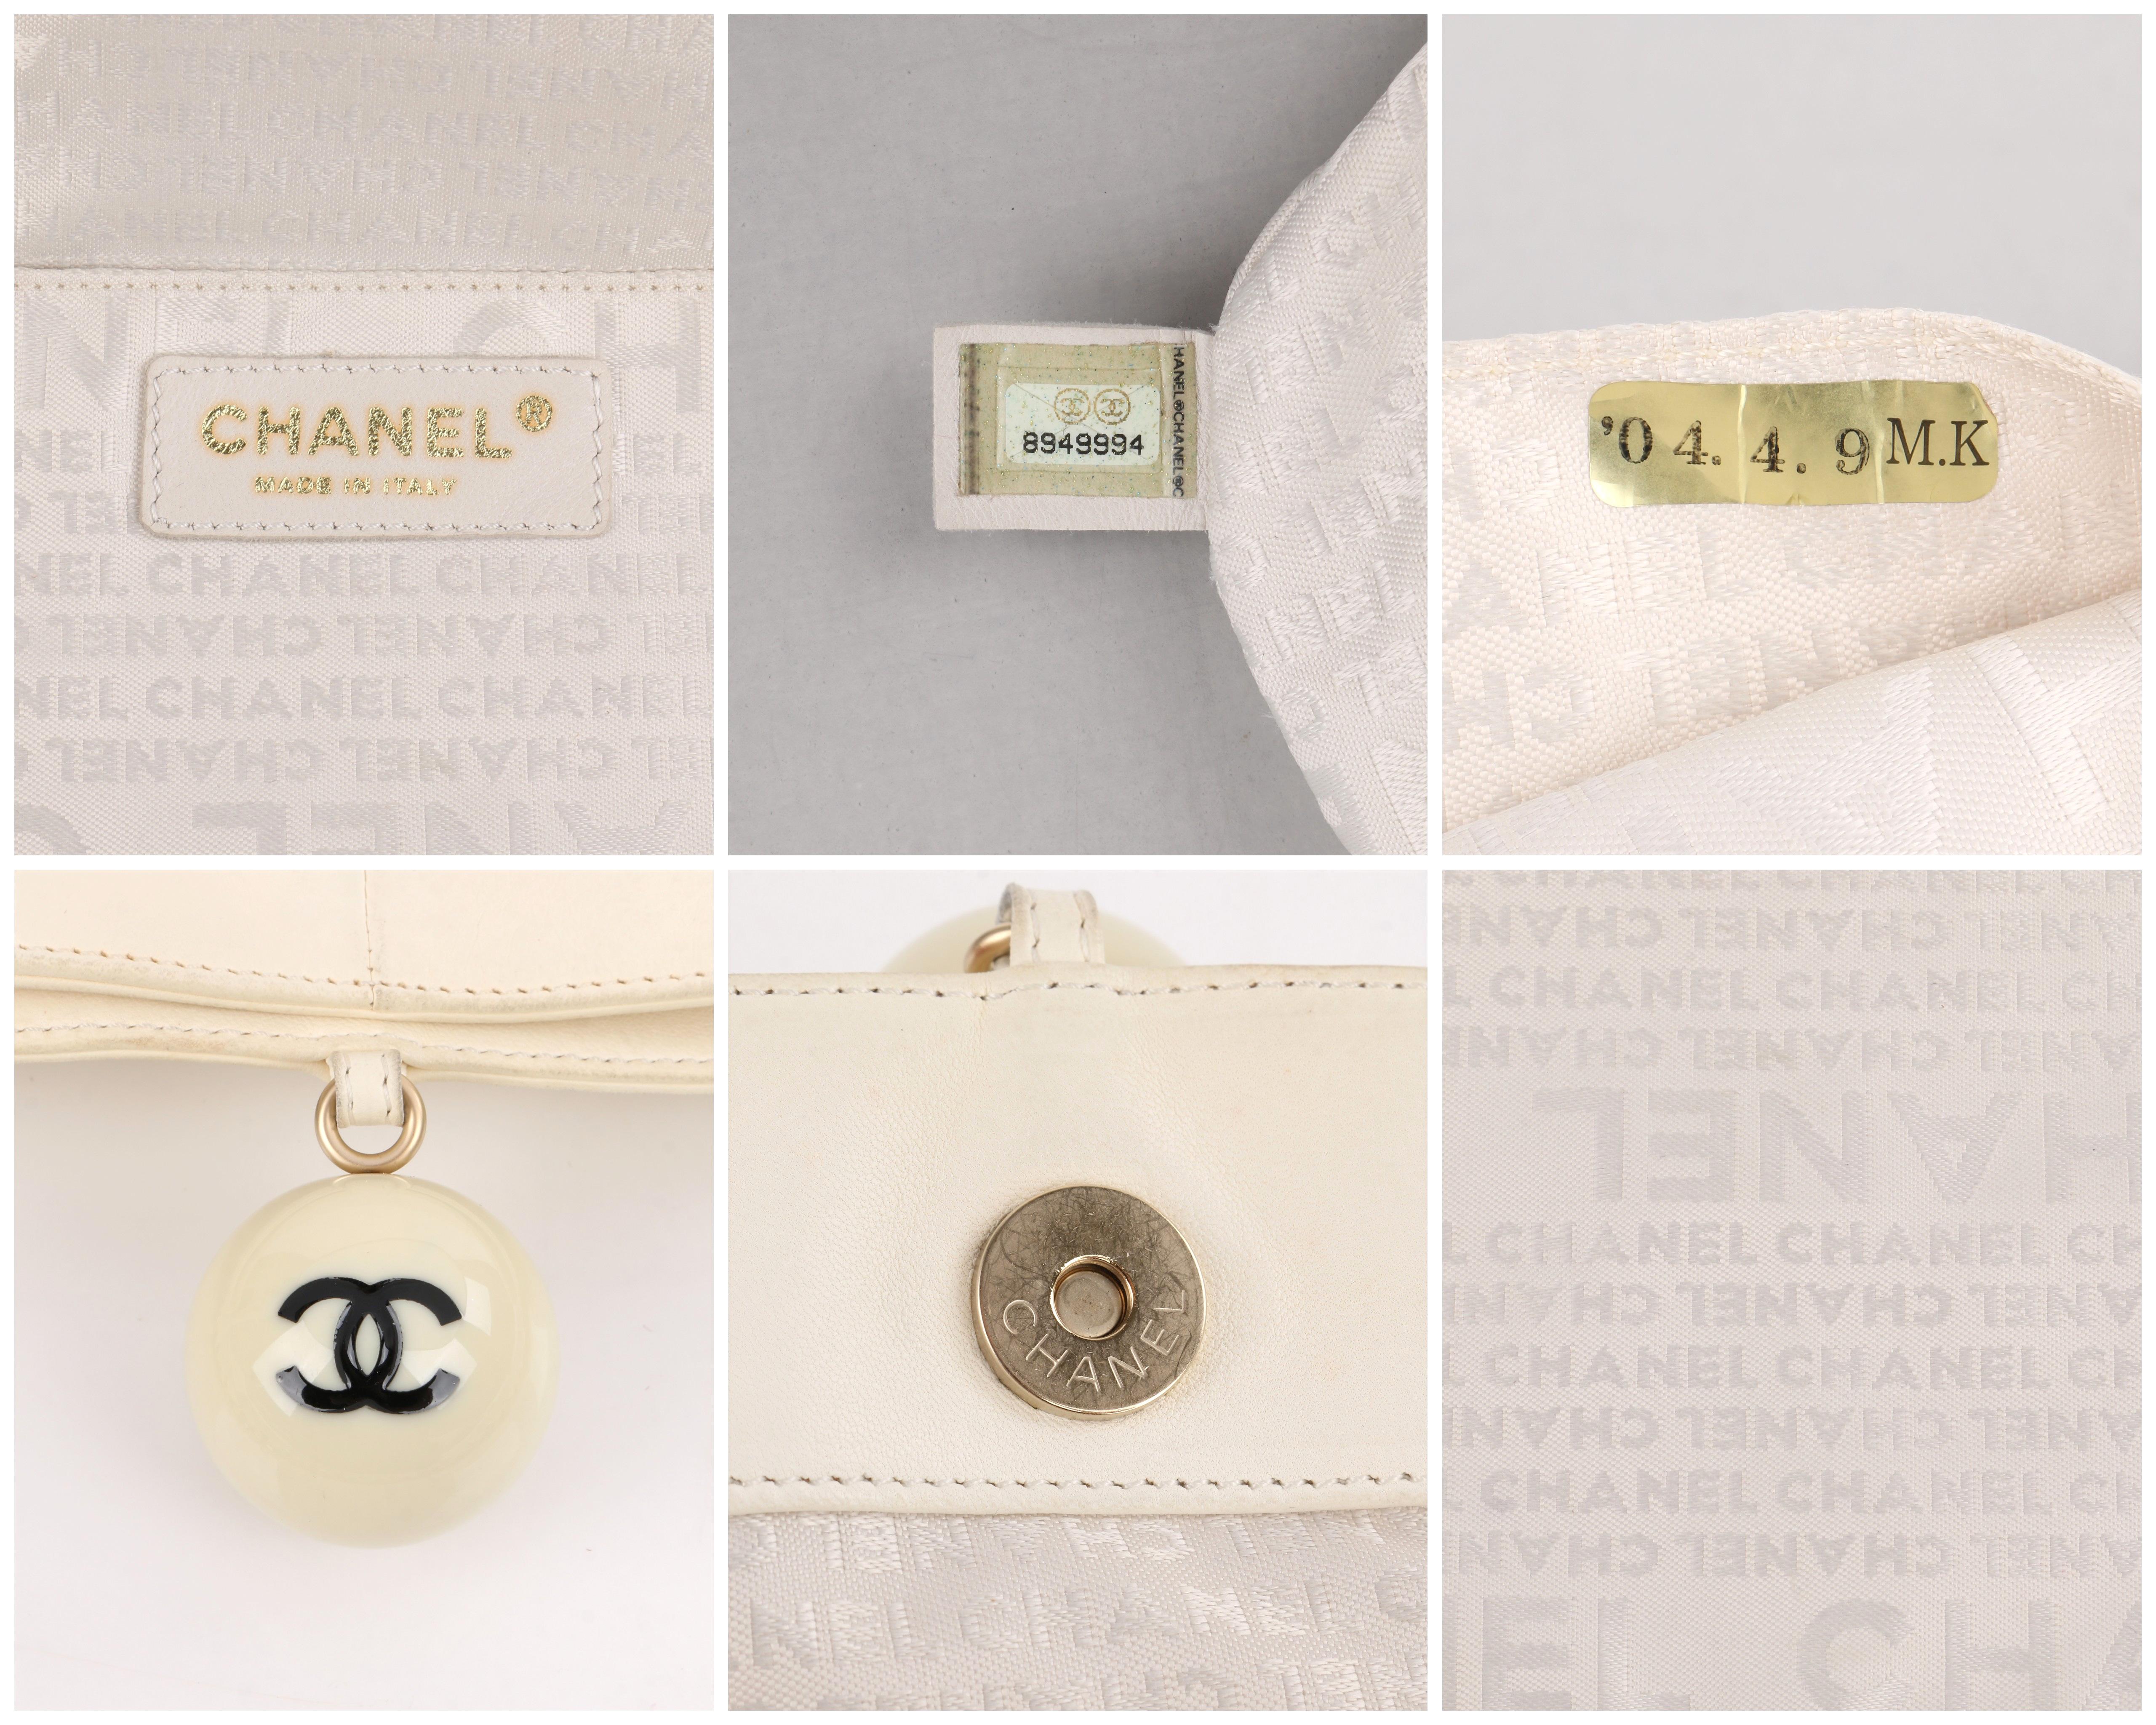 CHANEL c.2003 Ivory Lambskin Leather Coco Cue Ball Braided Chain Shoulder Bag 1